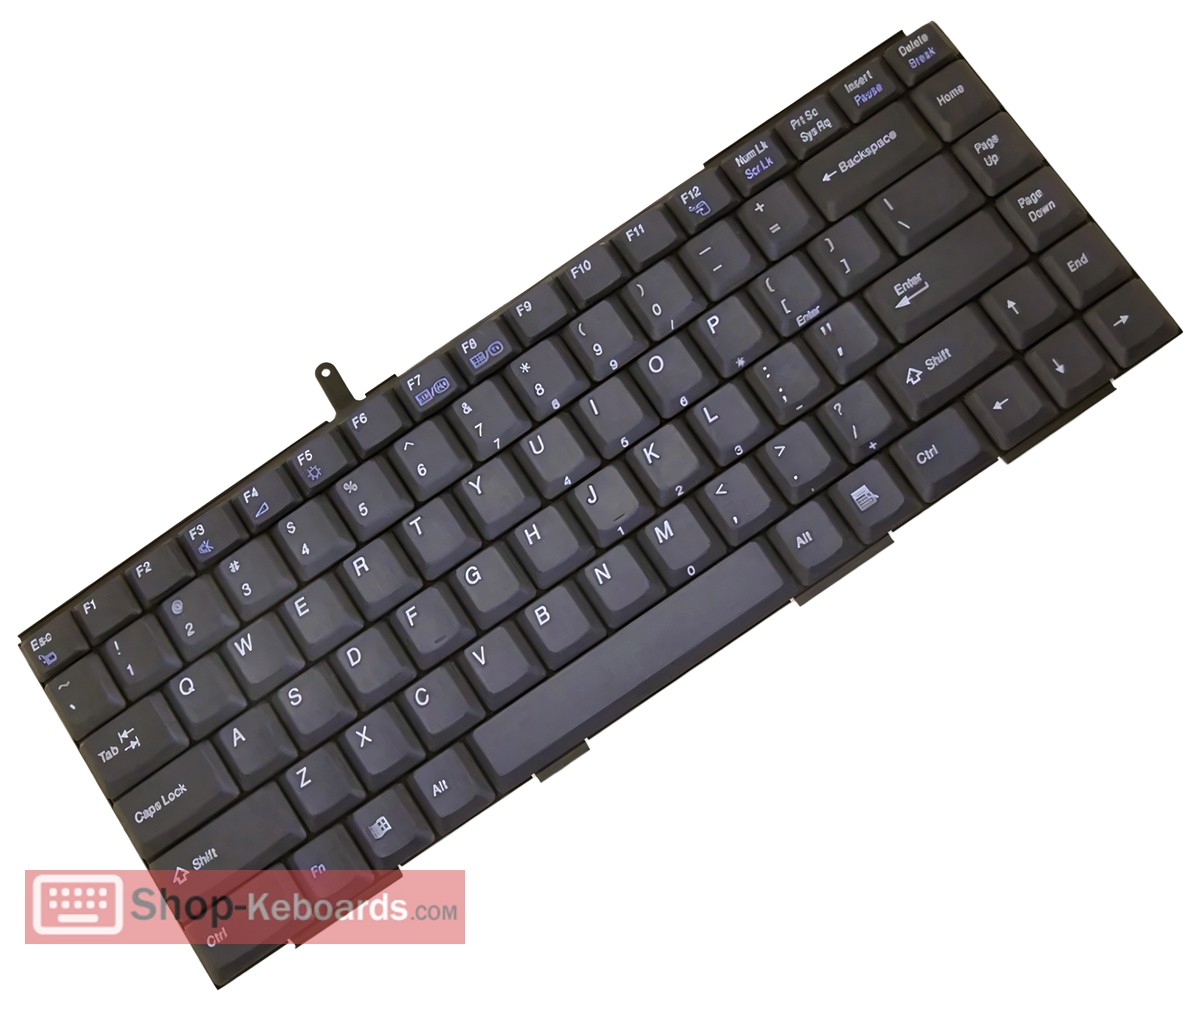 Sony VAIO PCG-F680K Keyboard replacement